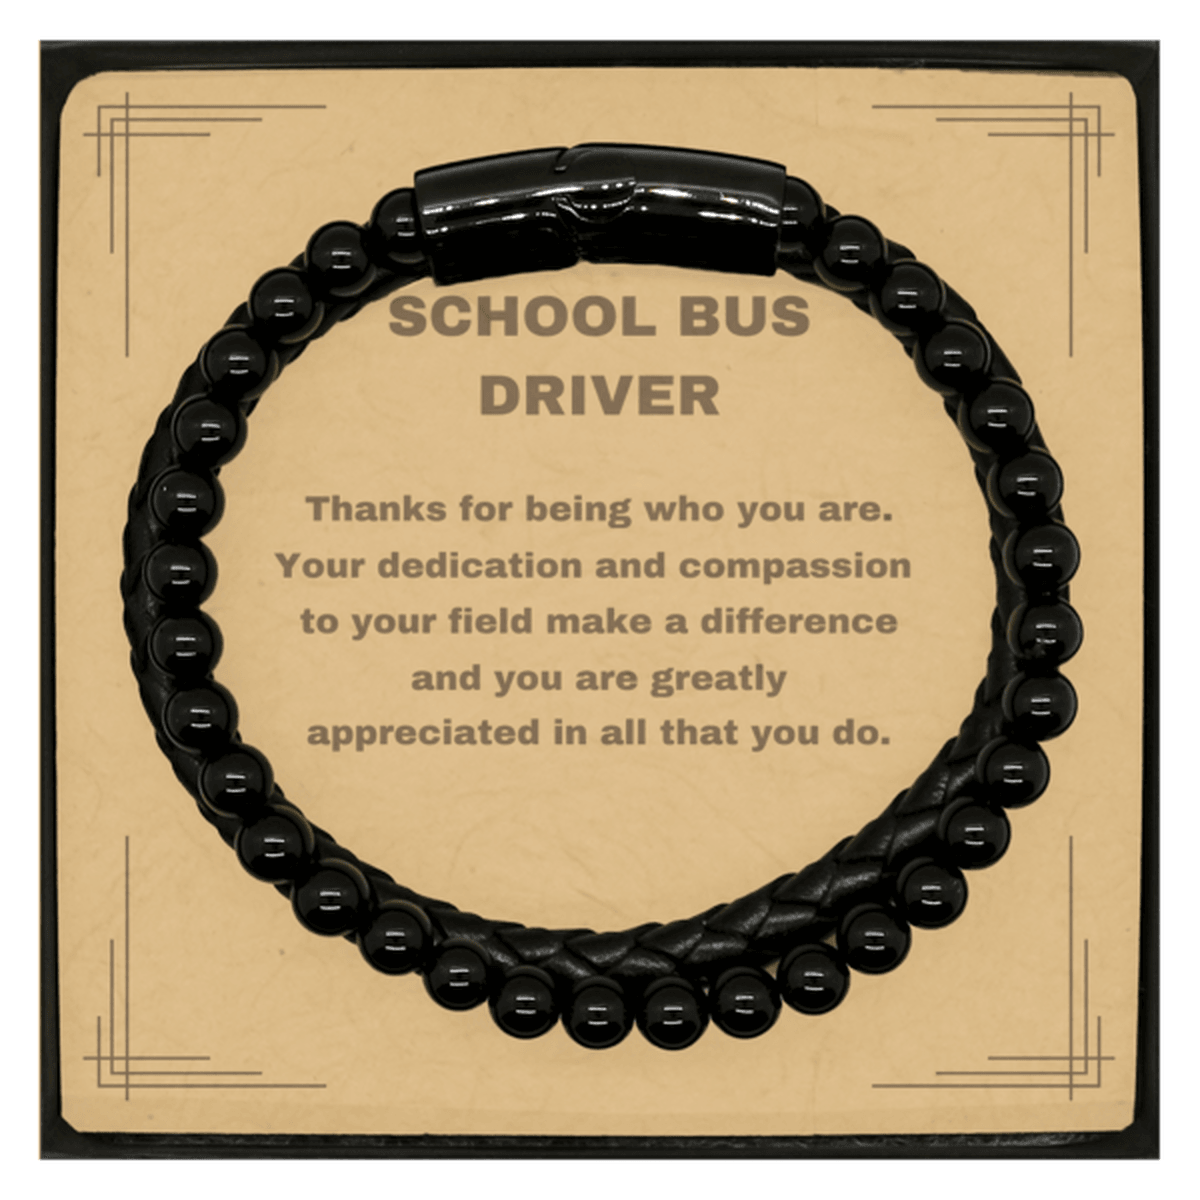 School Bus Driver Black Braided Leather Stone Bracelet - Thanks for being who you are - Birthday Christmas Jewelry Gifts Coworkers Colleague Boss - Mallard Moon Gift Shop